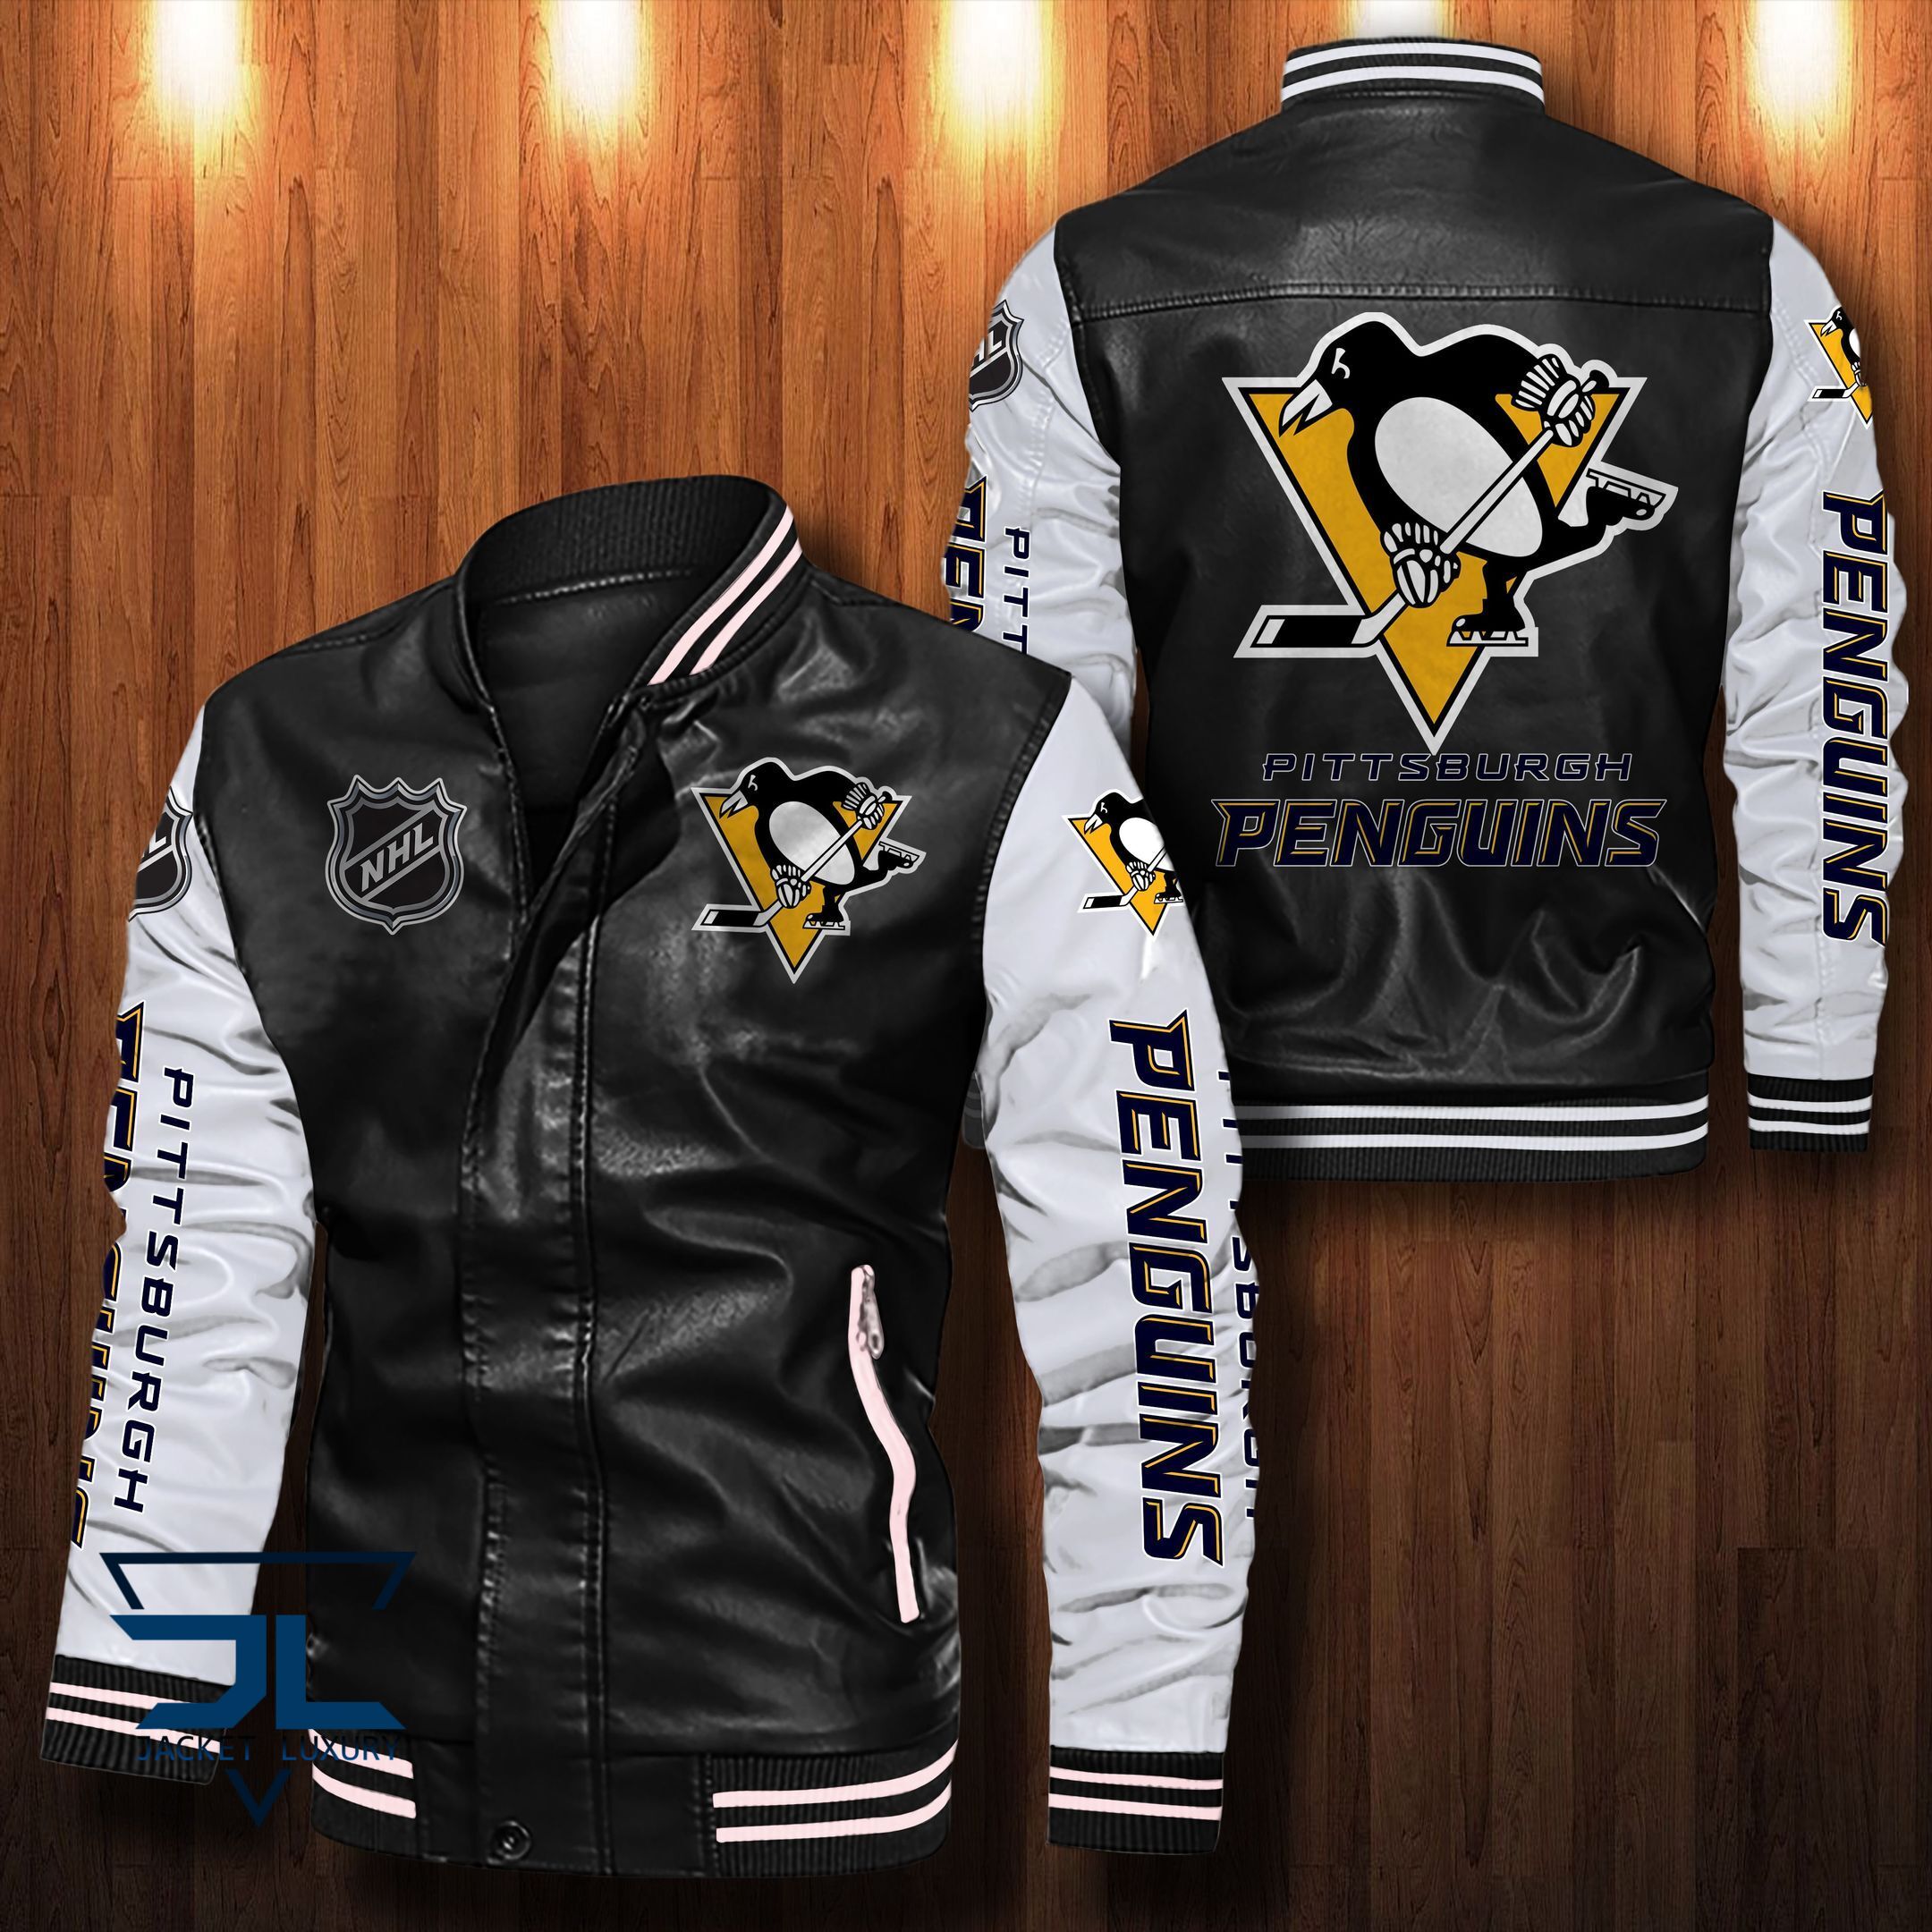 HOT Jacket only $69,99 so don't miss out - Be sure to pick up yours today! 165